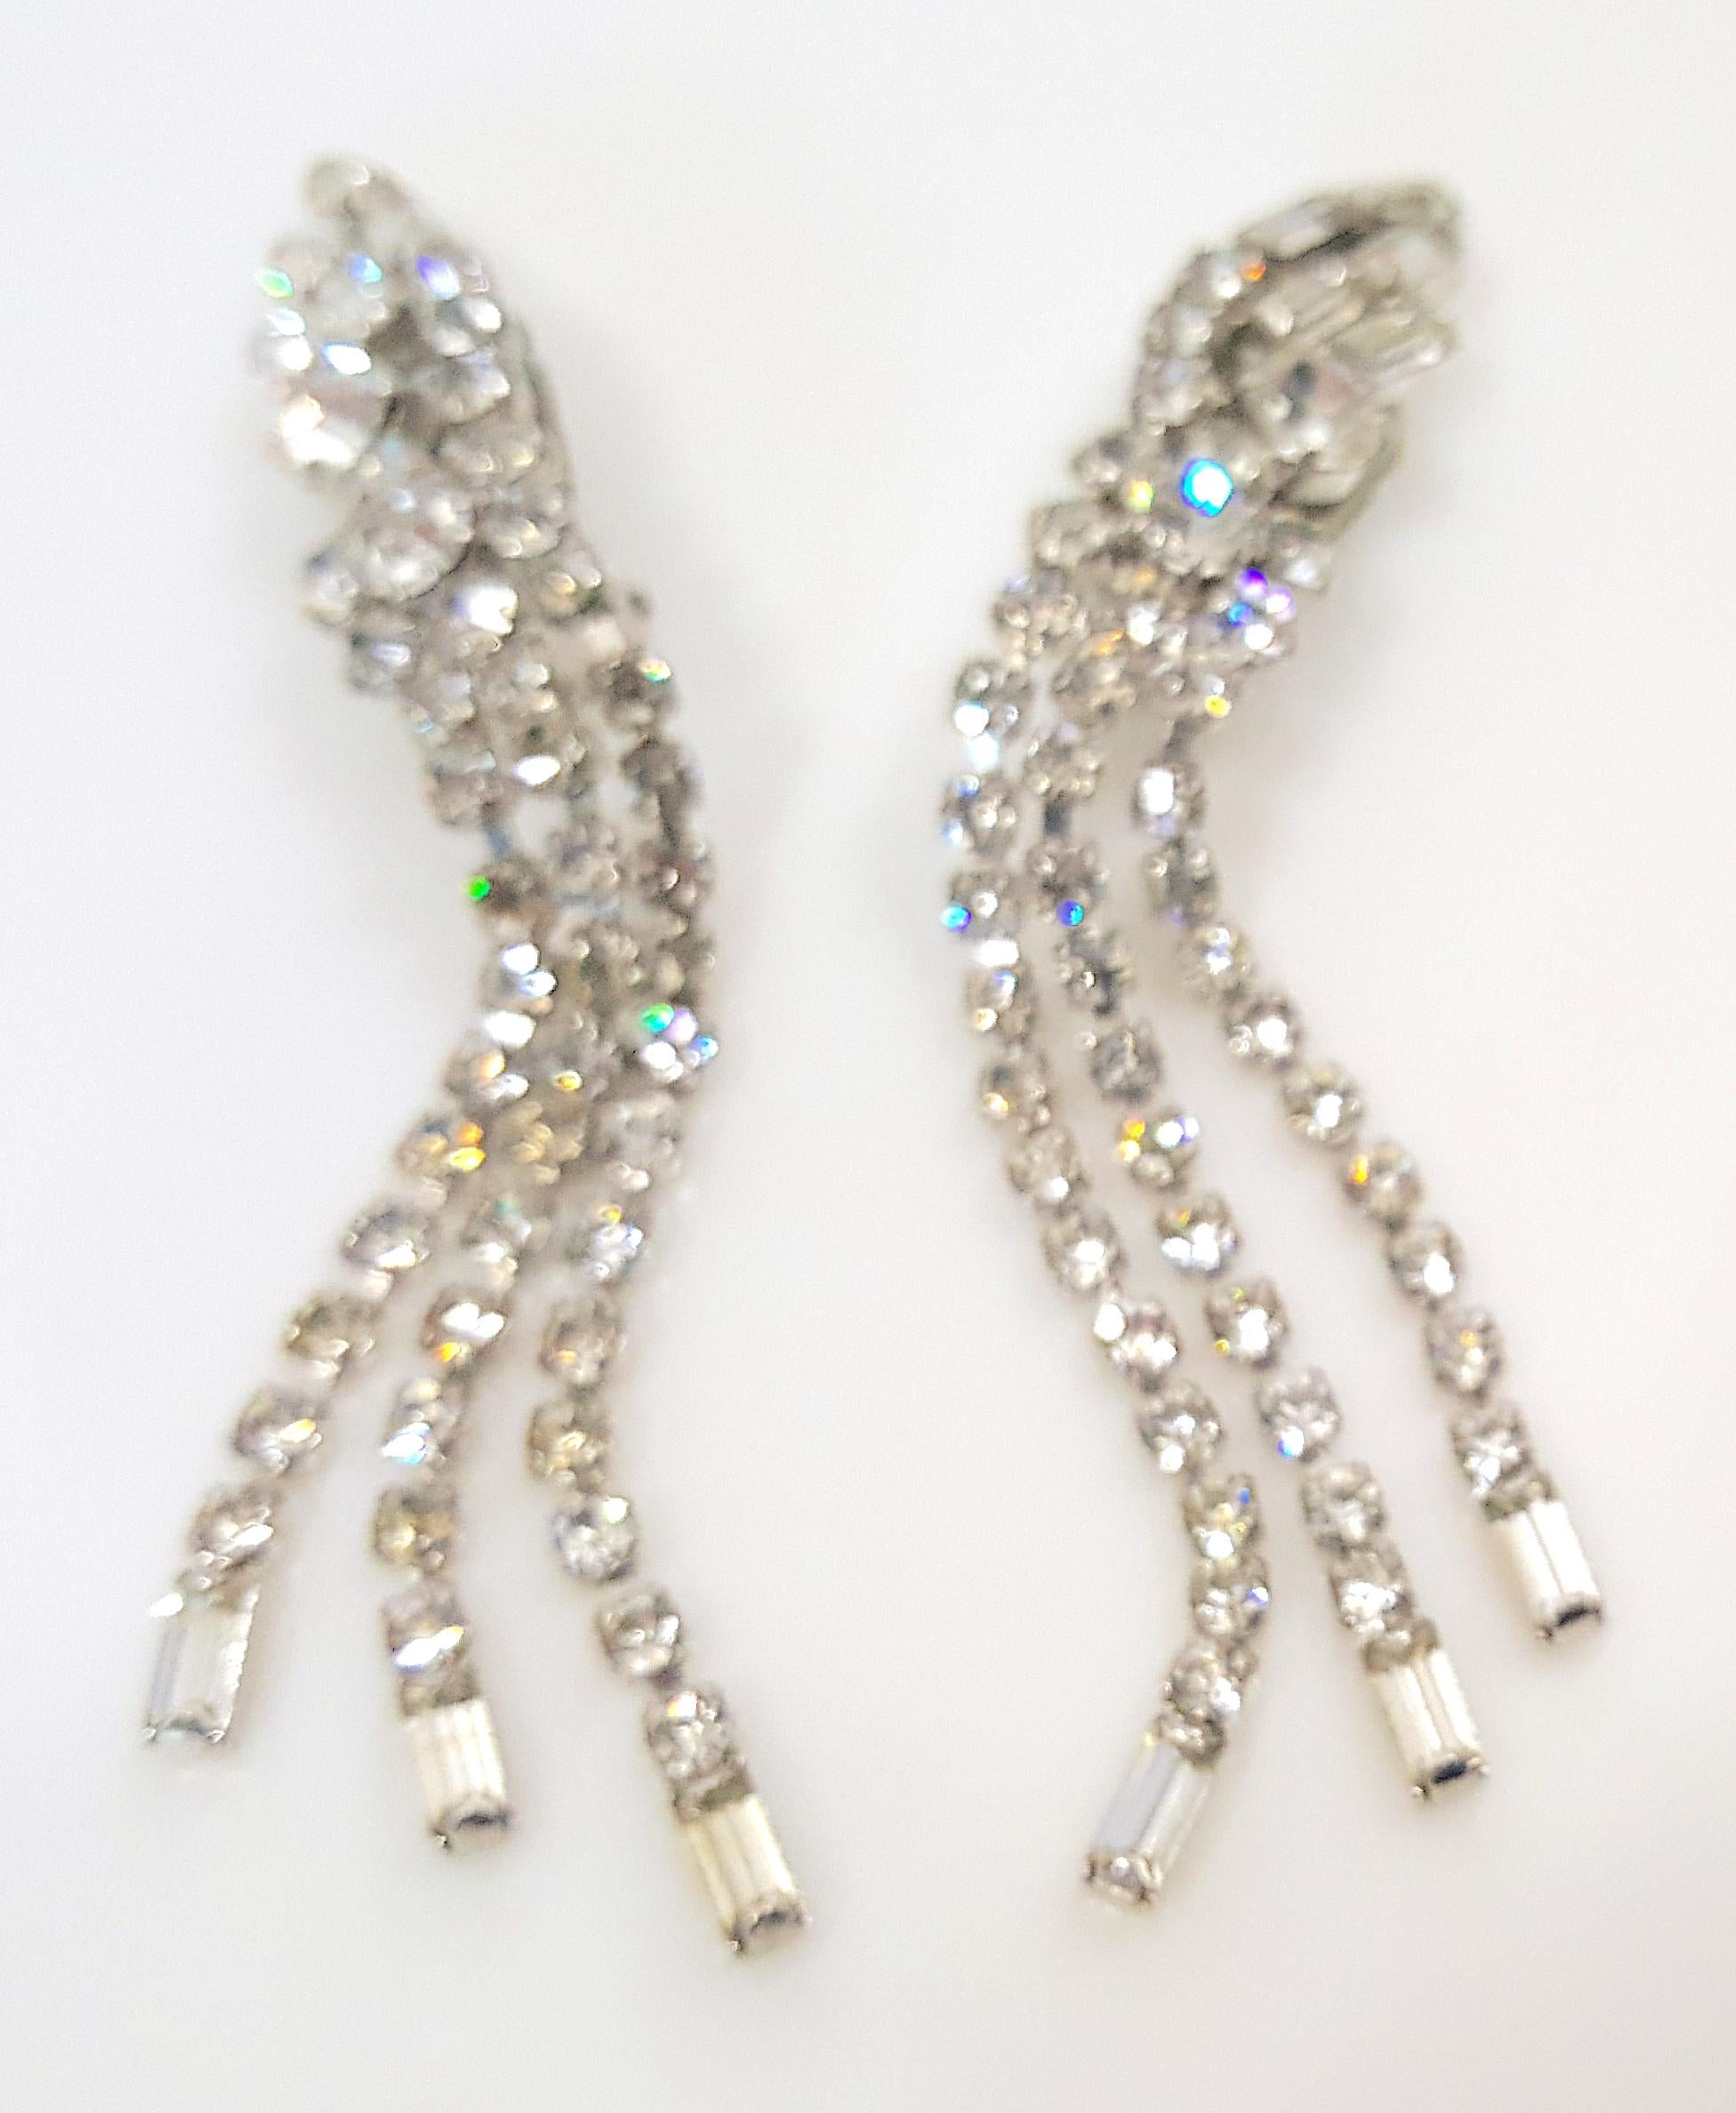 HautCoutureDiorDesignerWesternGermanyMaxMuller Crystal SinuousDangleClipEarrings For Sale 1